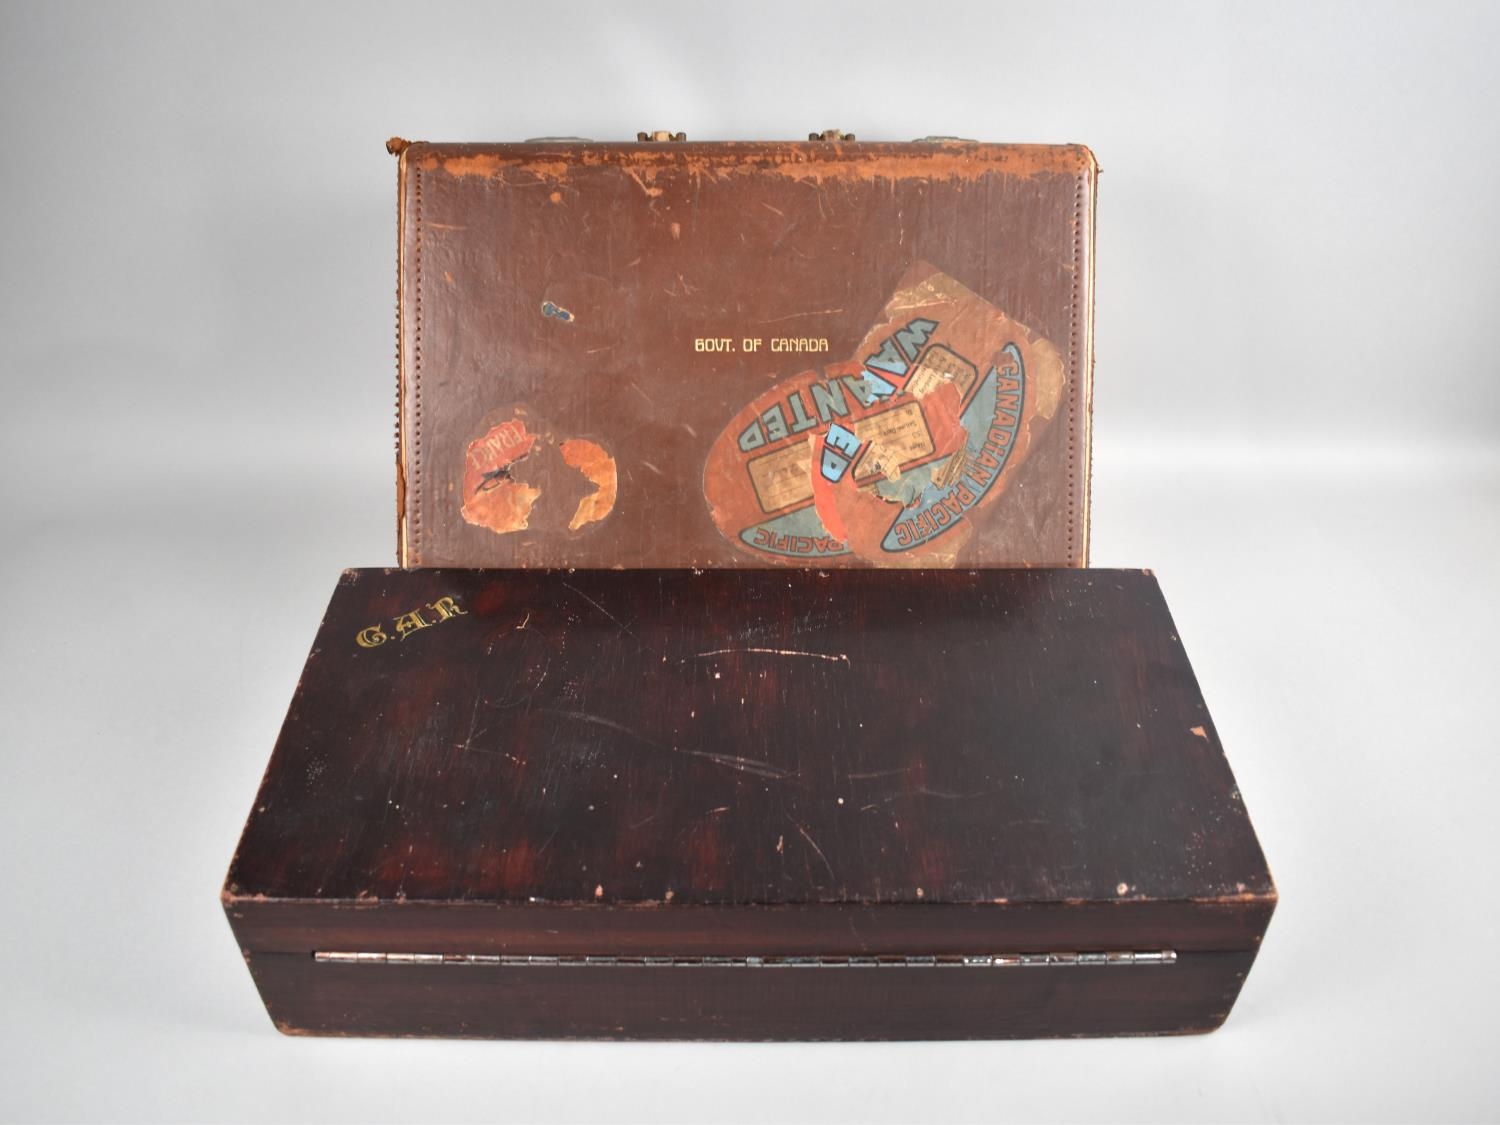 A Vintage Leather Document Case for the Govt. of Canada together with a wooden bo monogrammed C.A.R.